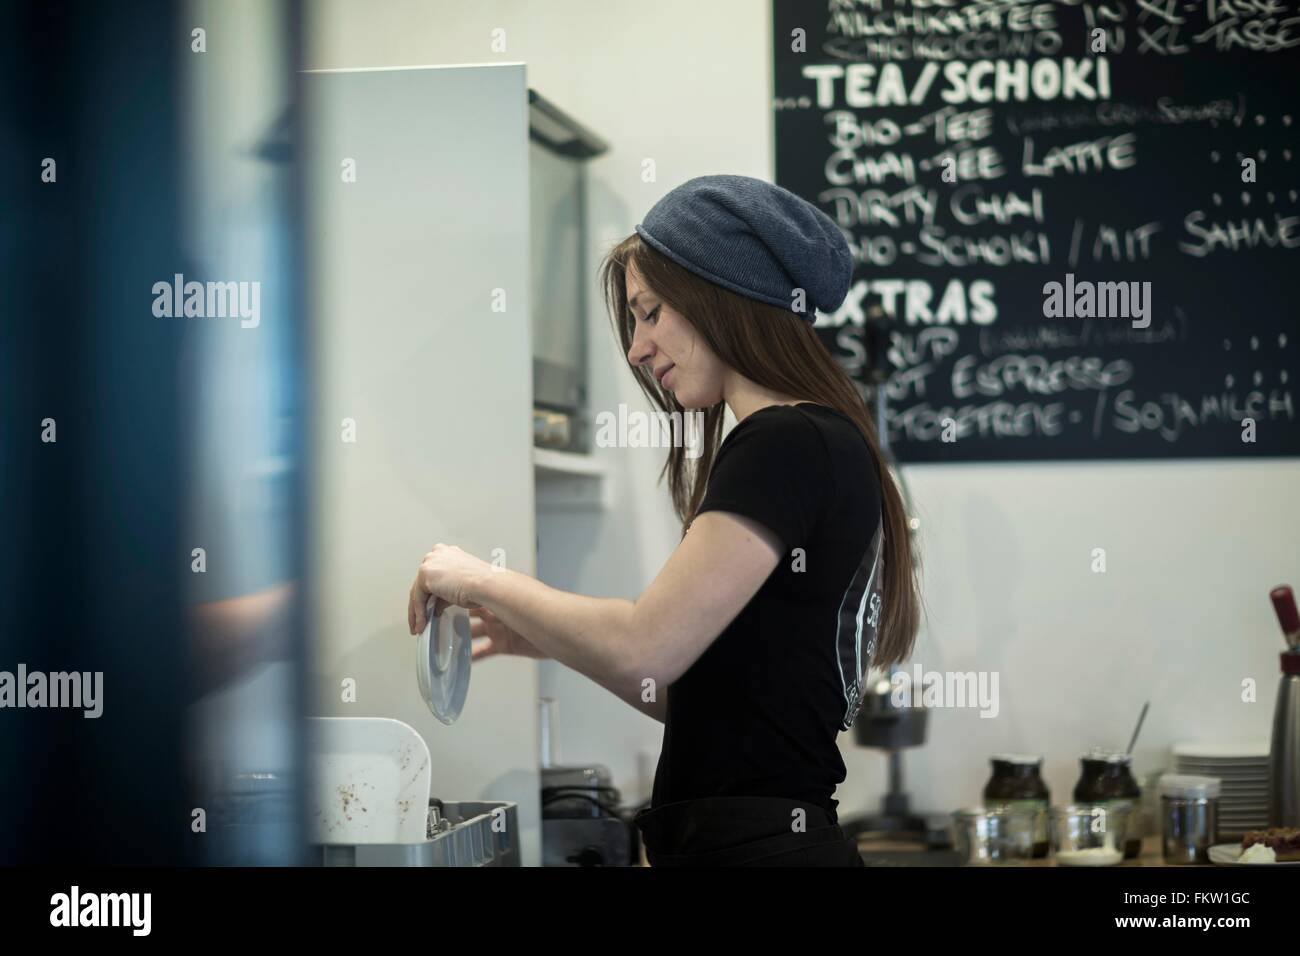 Young female waitress working in cafe kitchen Stock Photo